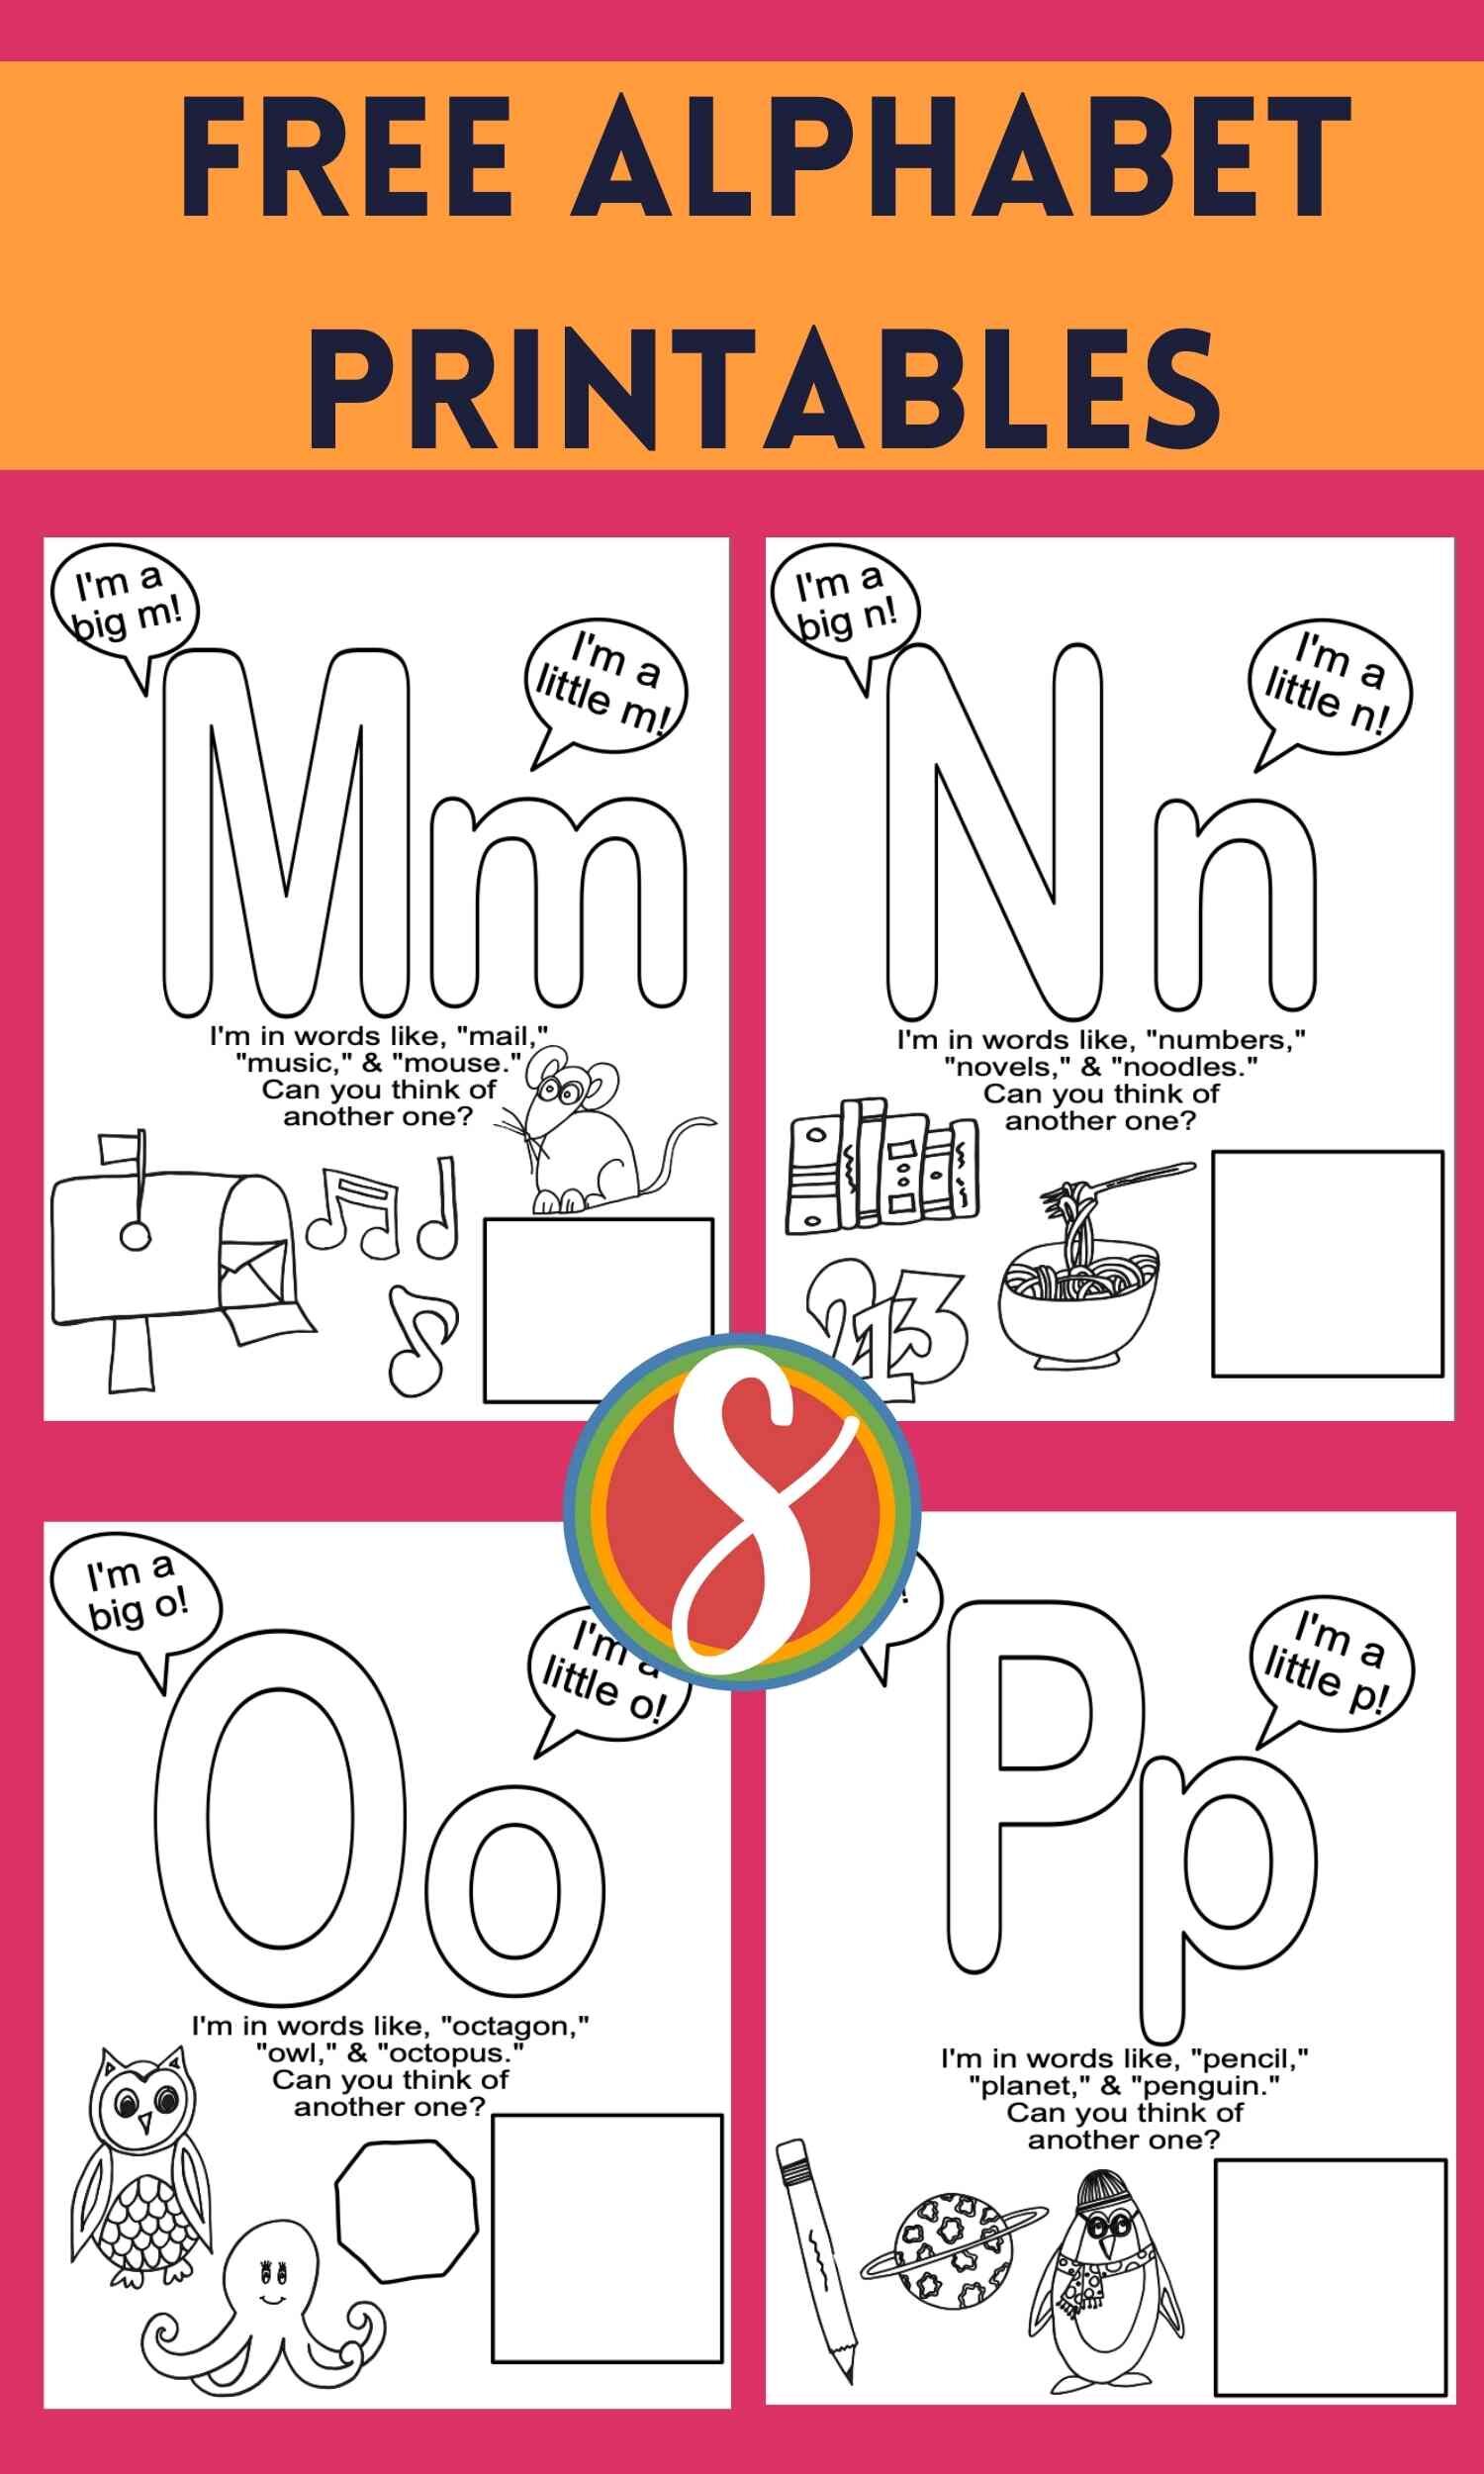 Free alphabet printable coloring pages to print and color from Stevie Doodles - get a free activity page for every single letter in the English alphabet, all free to print as many copies as you’d like for your whole class